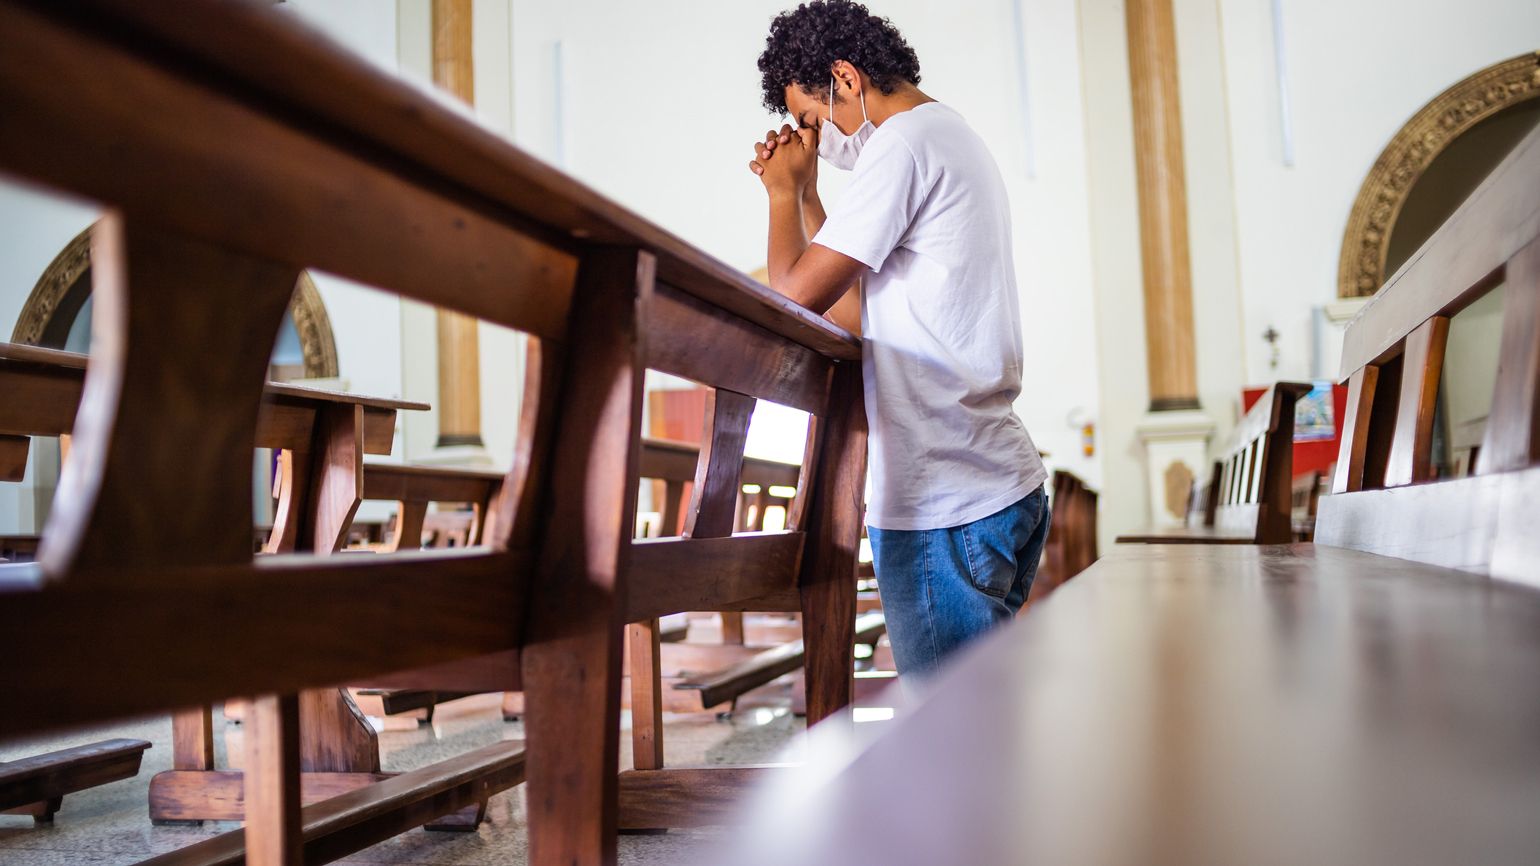 A man praying in church; Getty Images